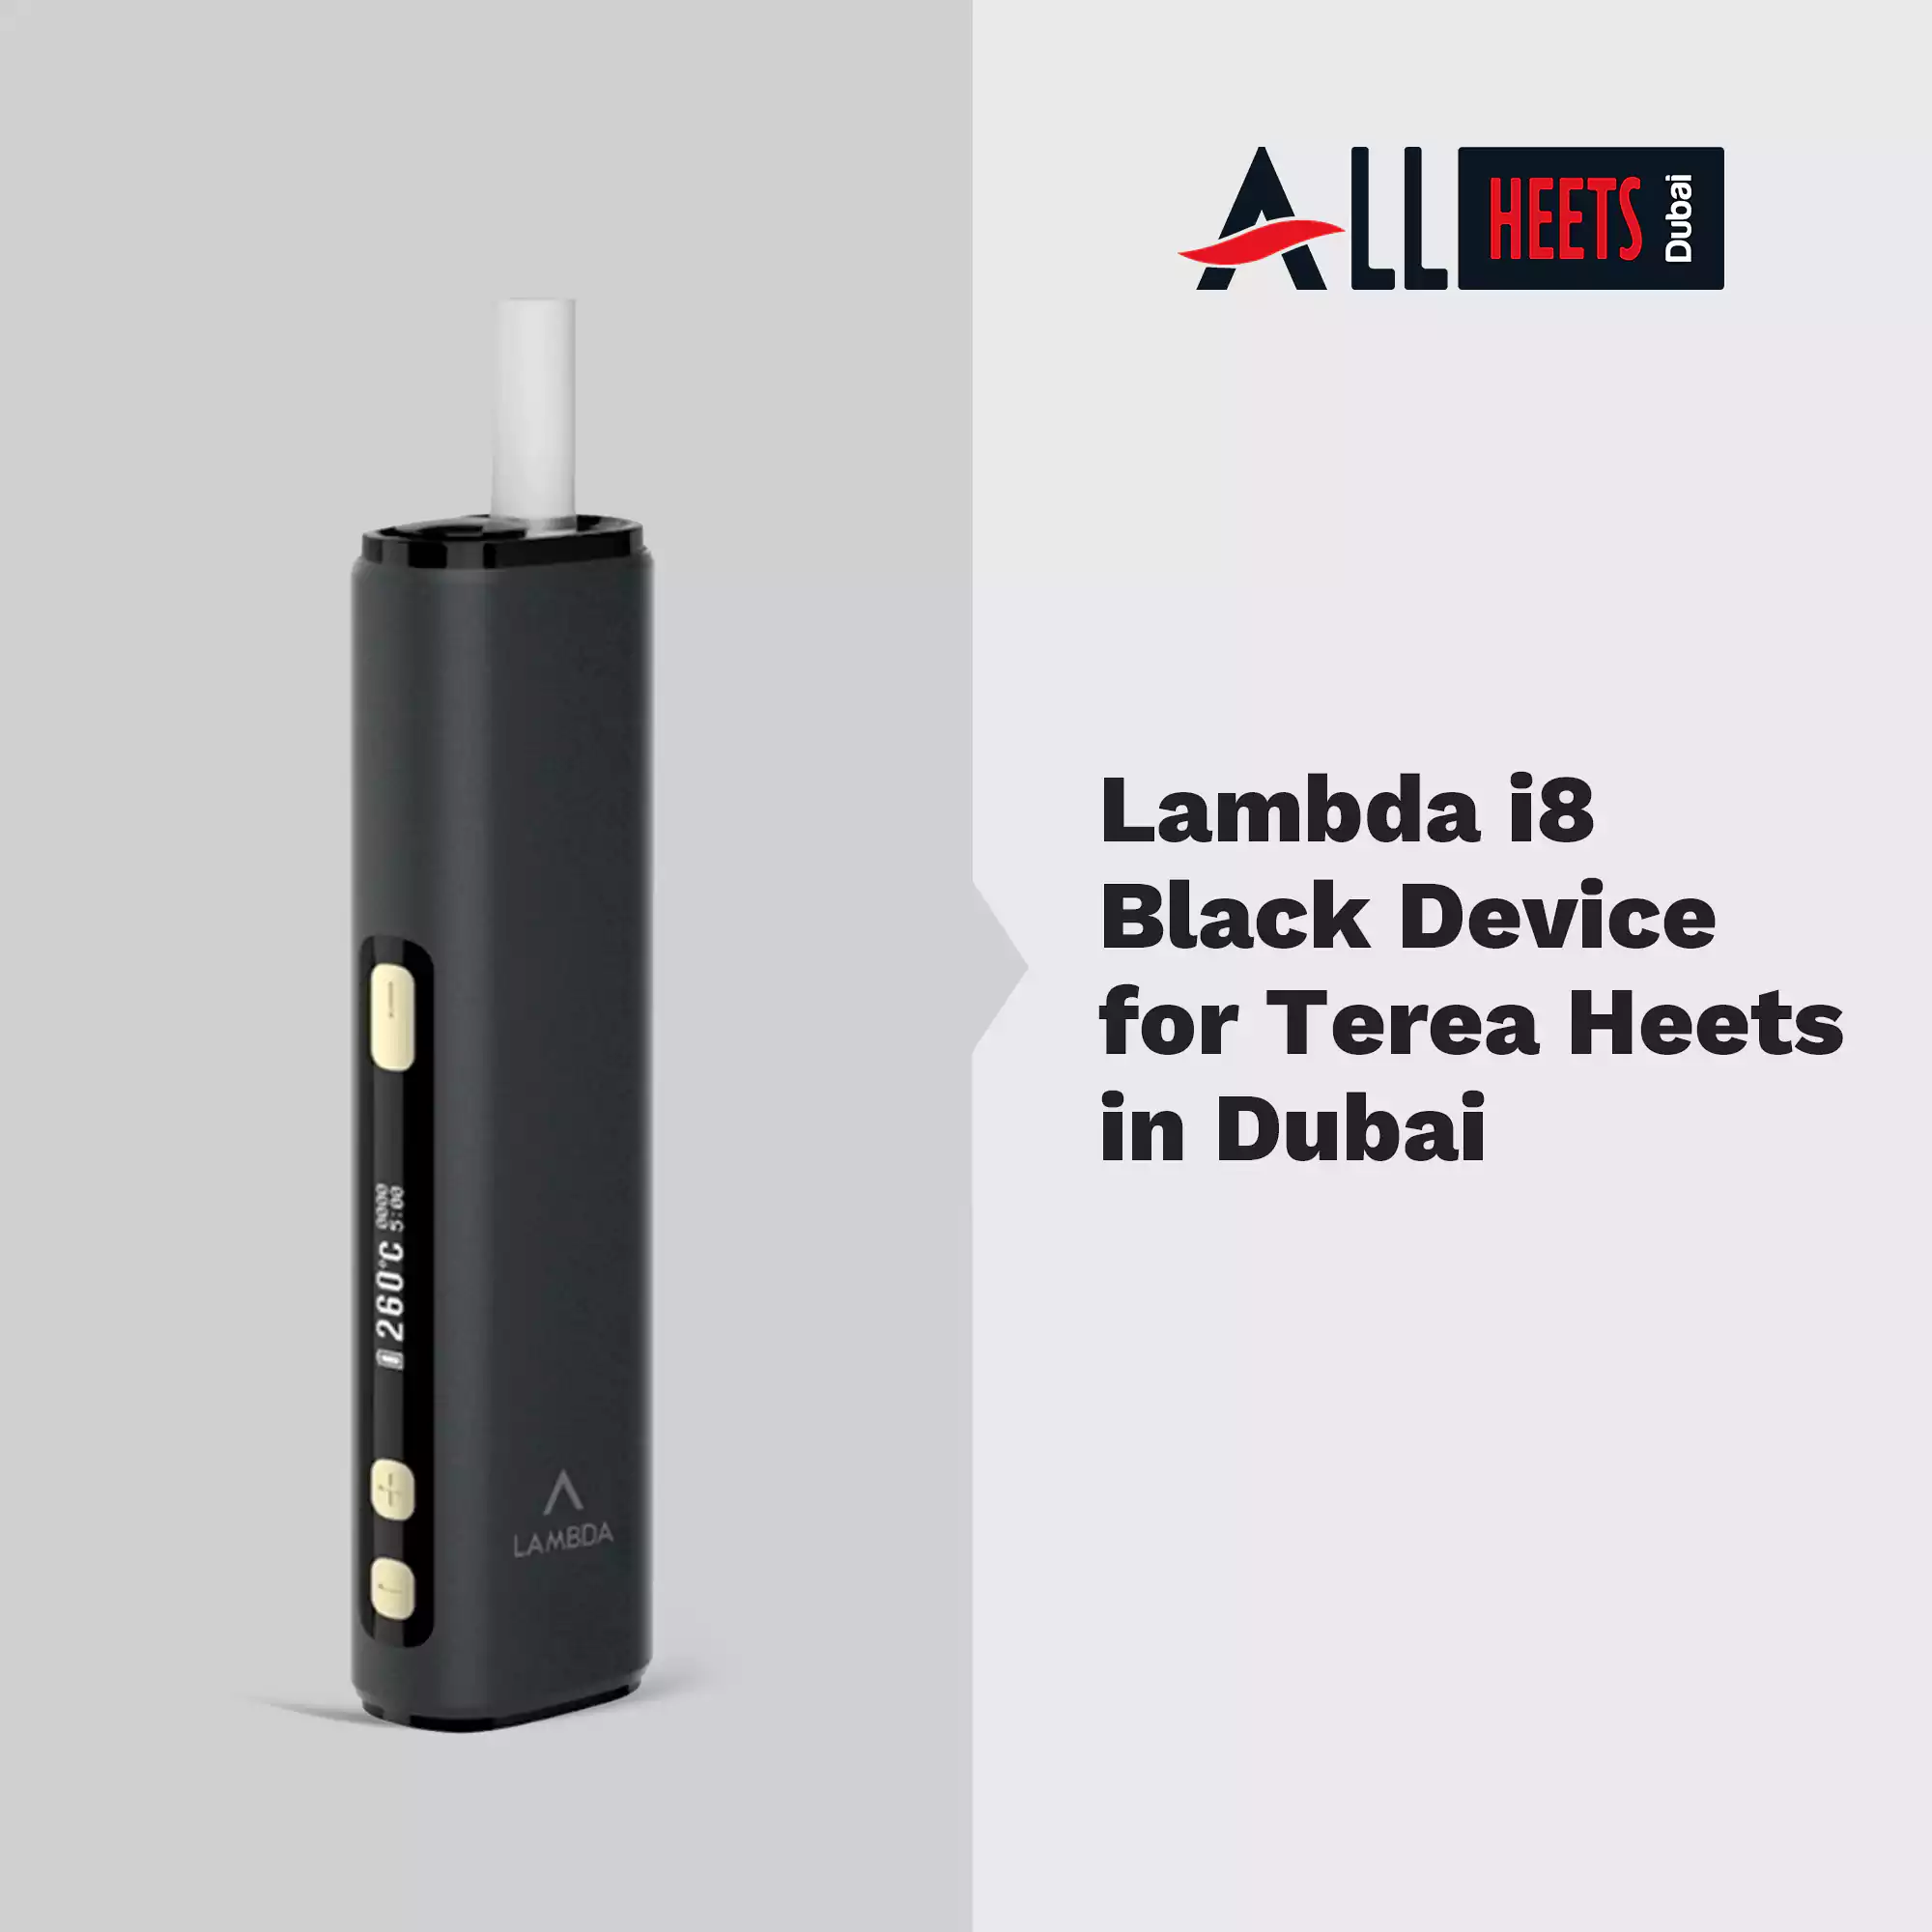 Lambda CC Gold Device For Heets Sticks with Free Home Delivery in